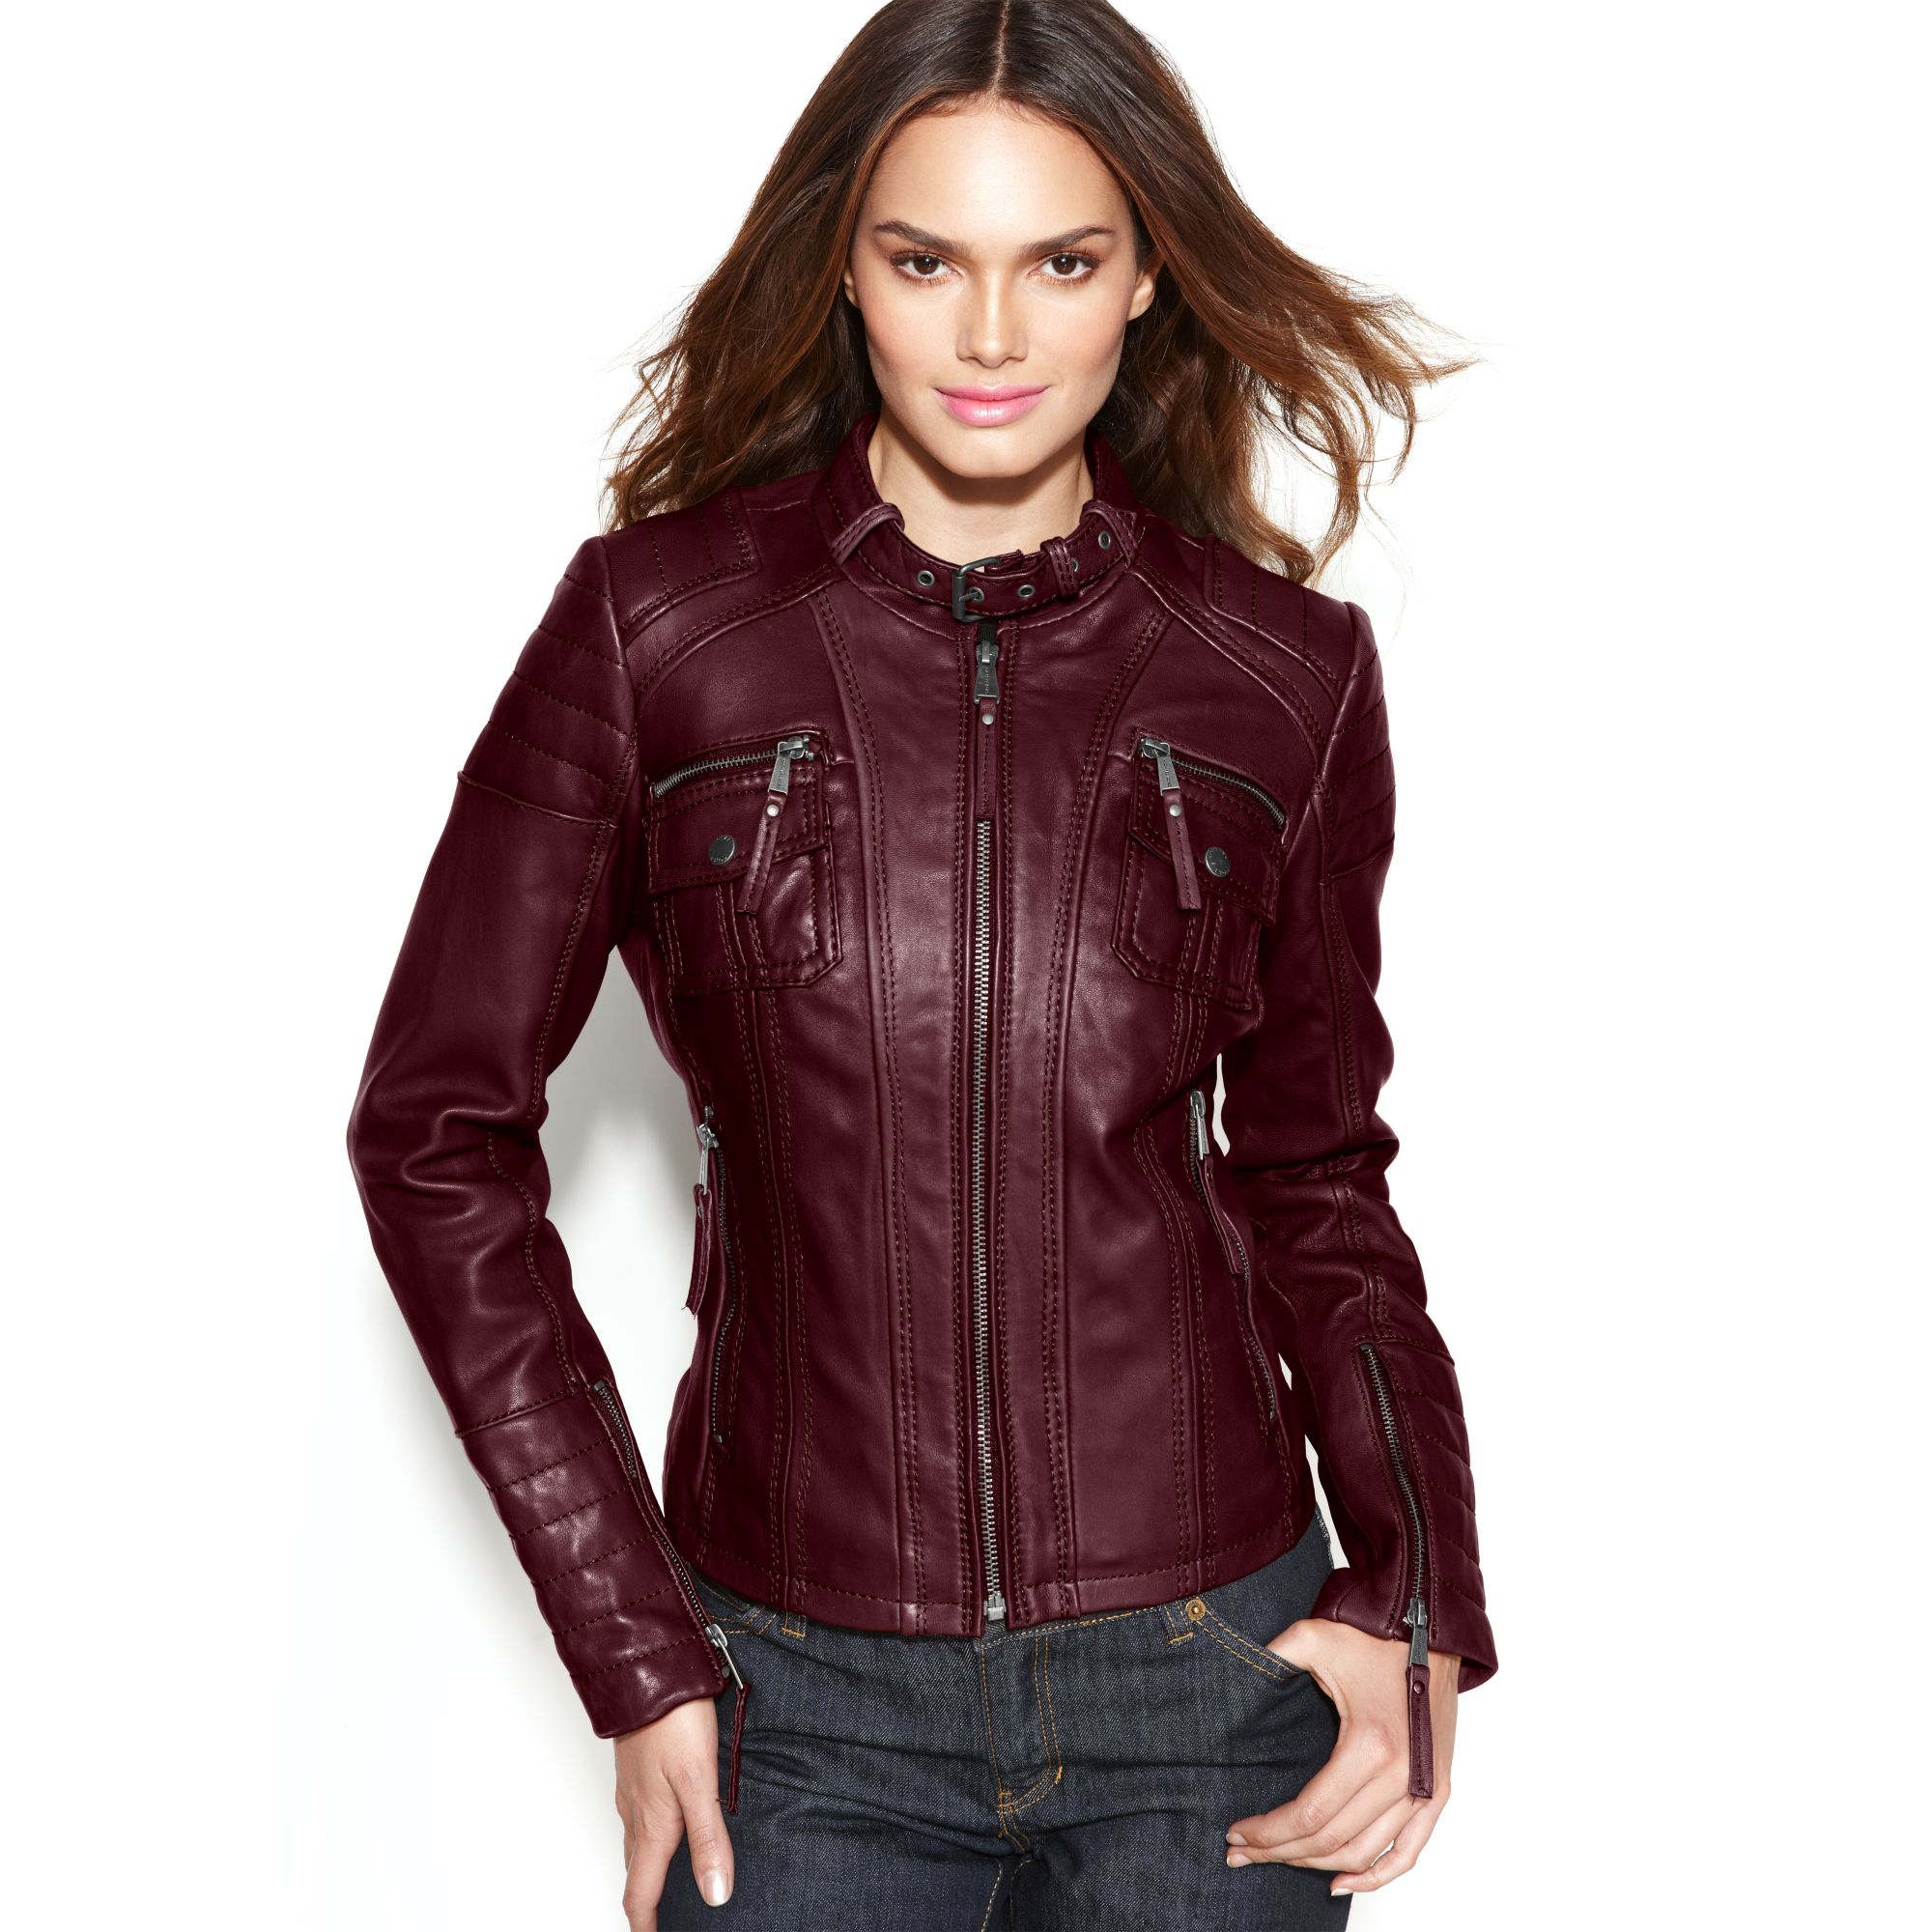 Michael Kors Leather Bucklecollar Motorcycle Jacket in Red